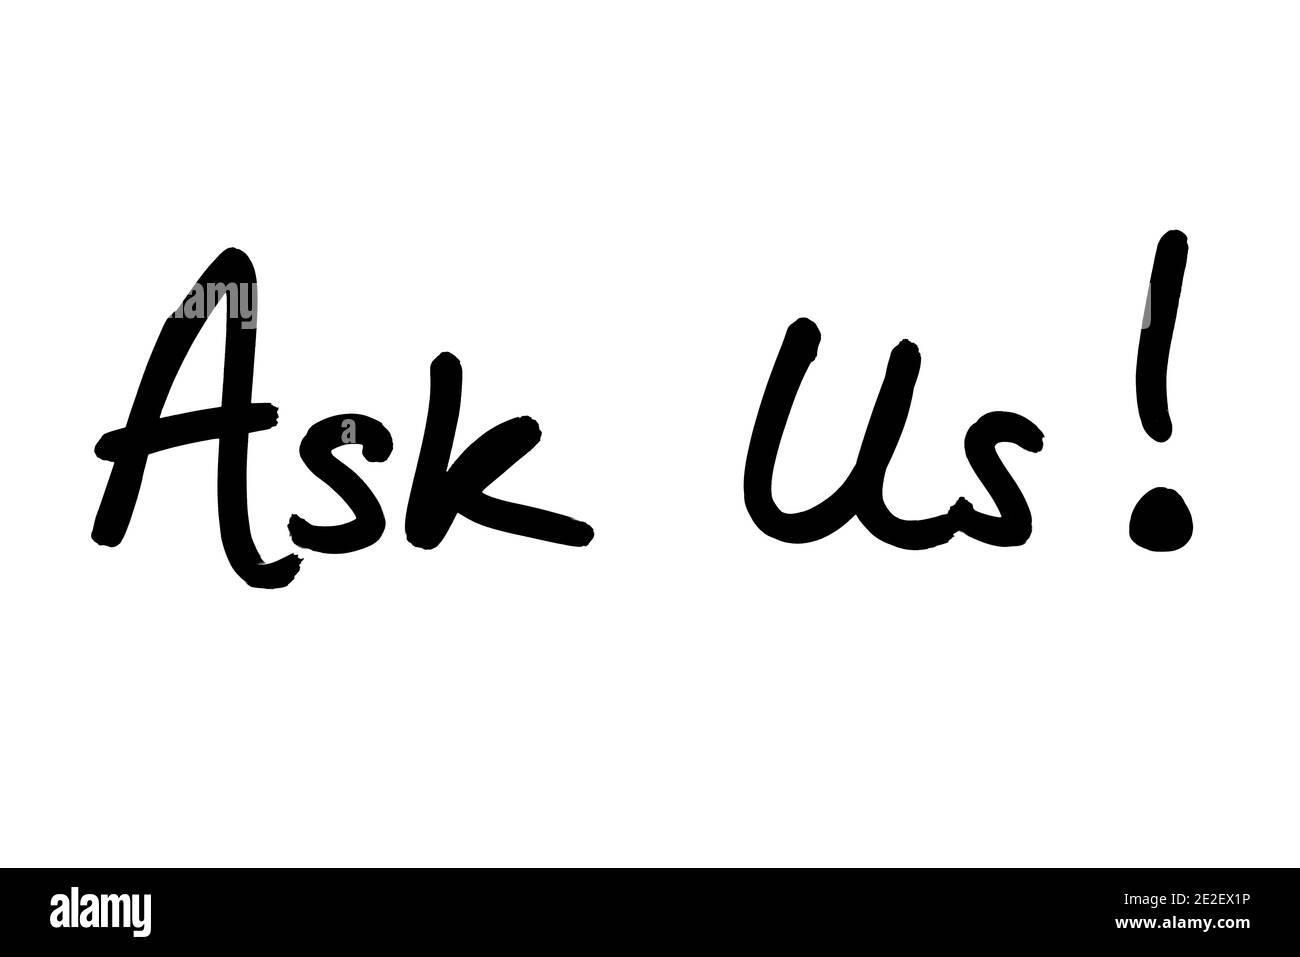 Ask Us! handwritten on a white background. Stock Photo